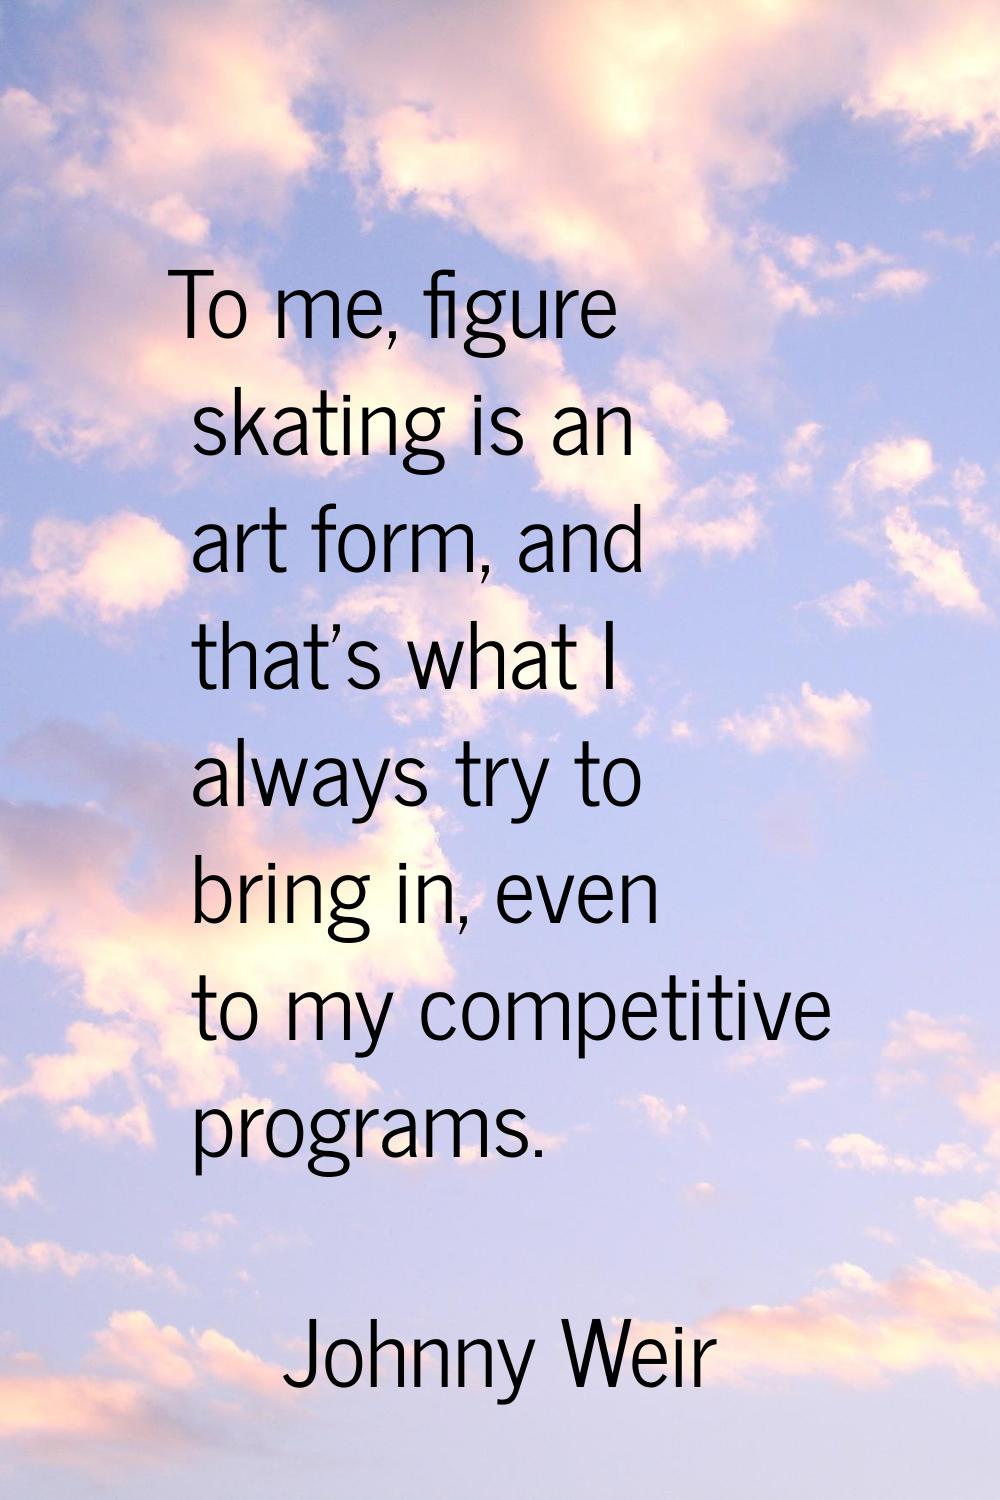 To me, figure skating is an art form, and that's what I always try to bring in, even to my competit